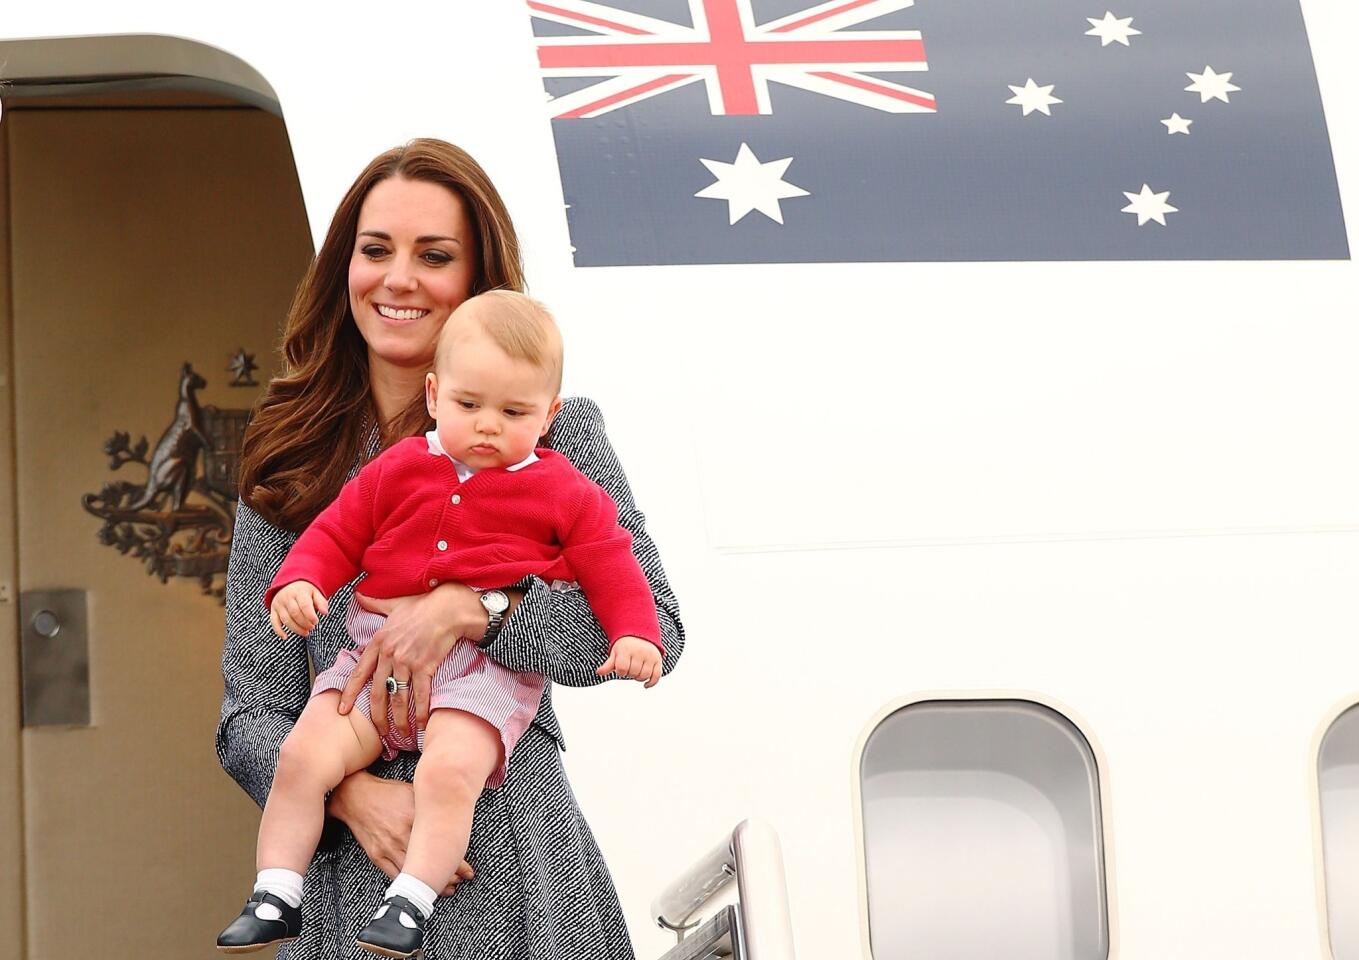 Catherine, duchess of Cambridge, and her son Prince George, leave the Defence Establishment Fairbairn as they head back to the U.K. after finishing their royal visit to Australia.